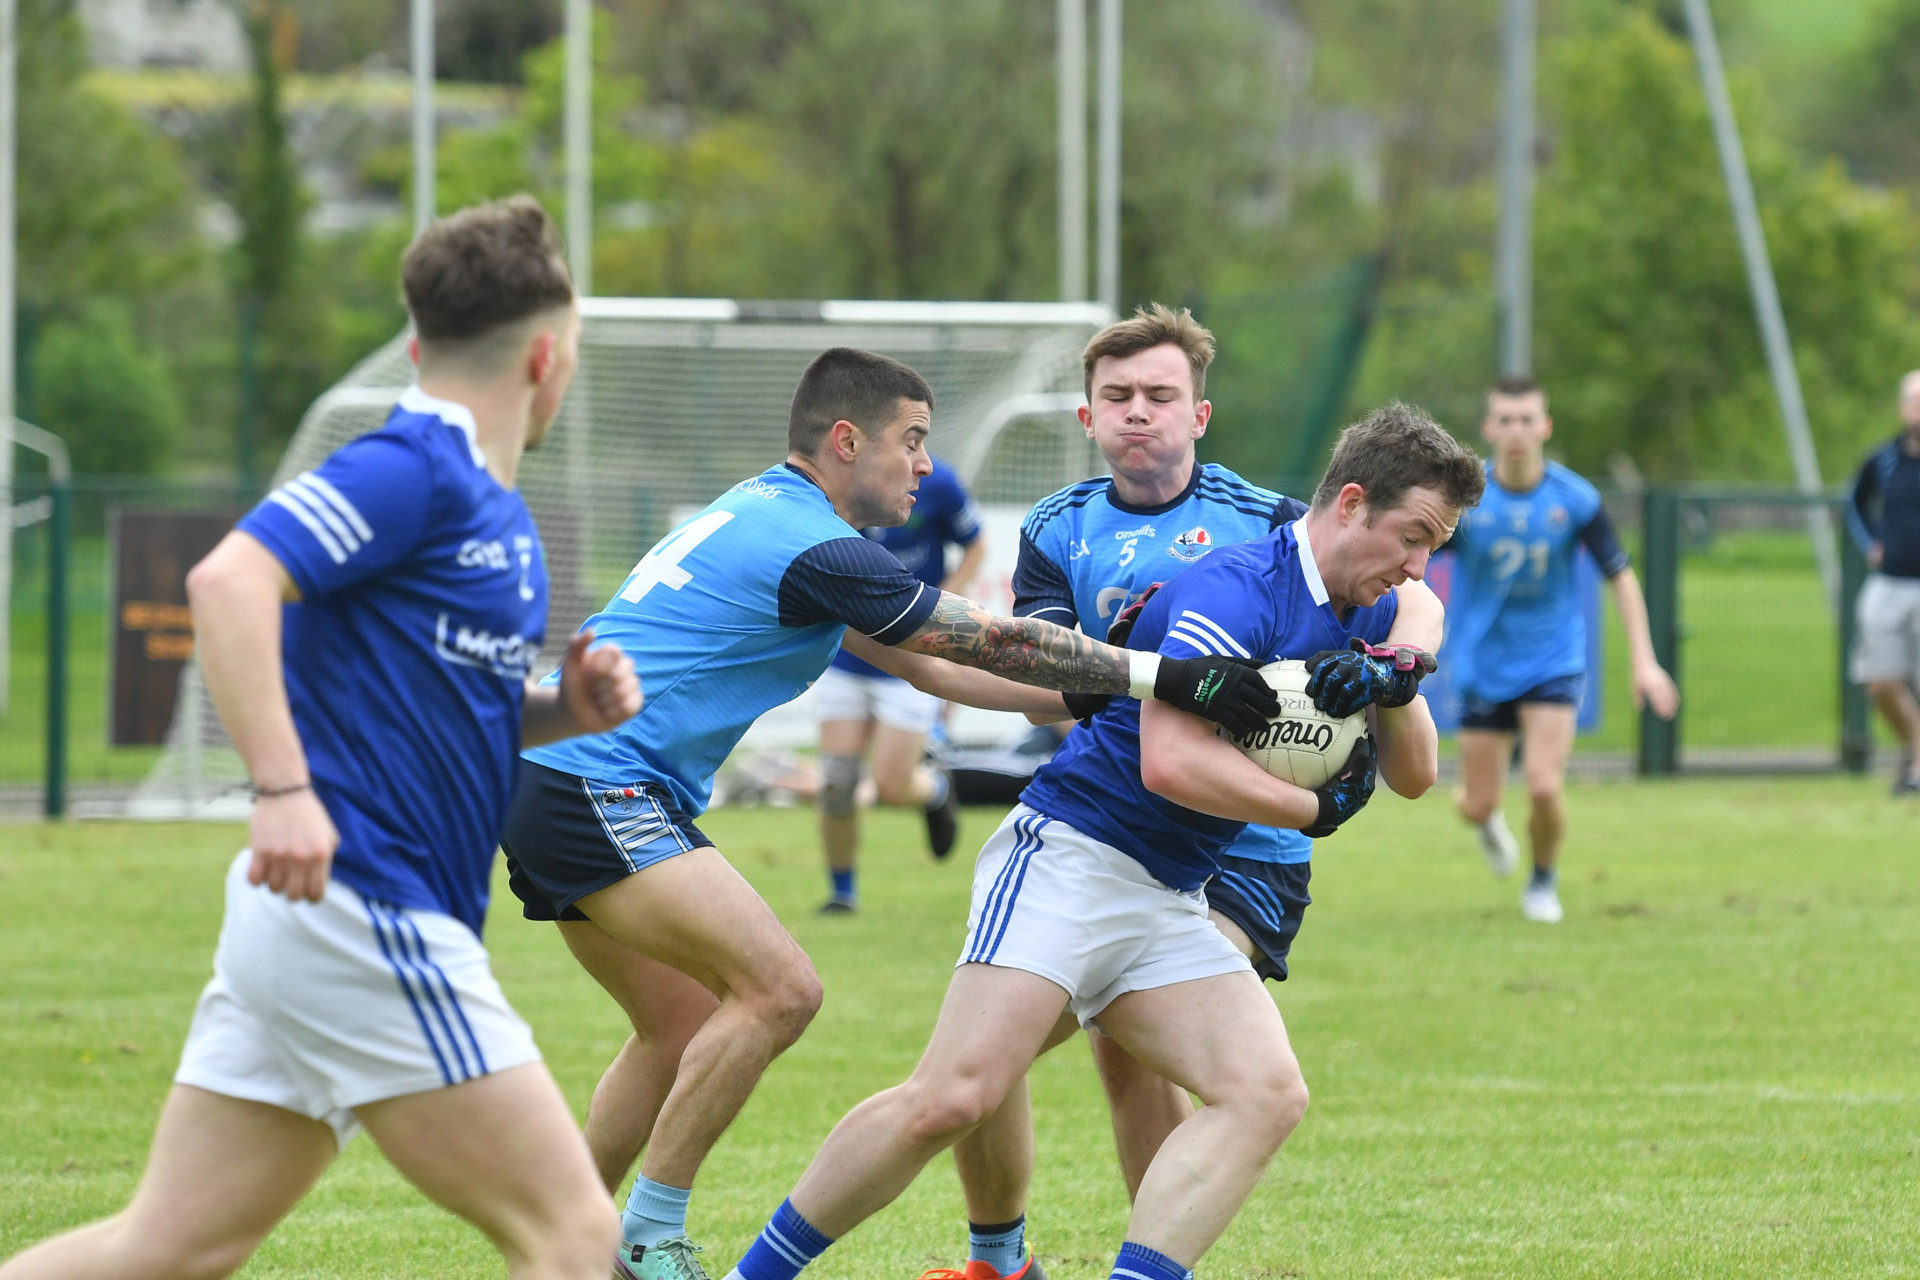 Sigersons get off to successful start against Derrytresk